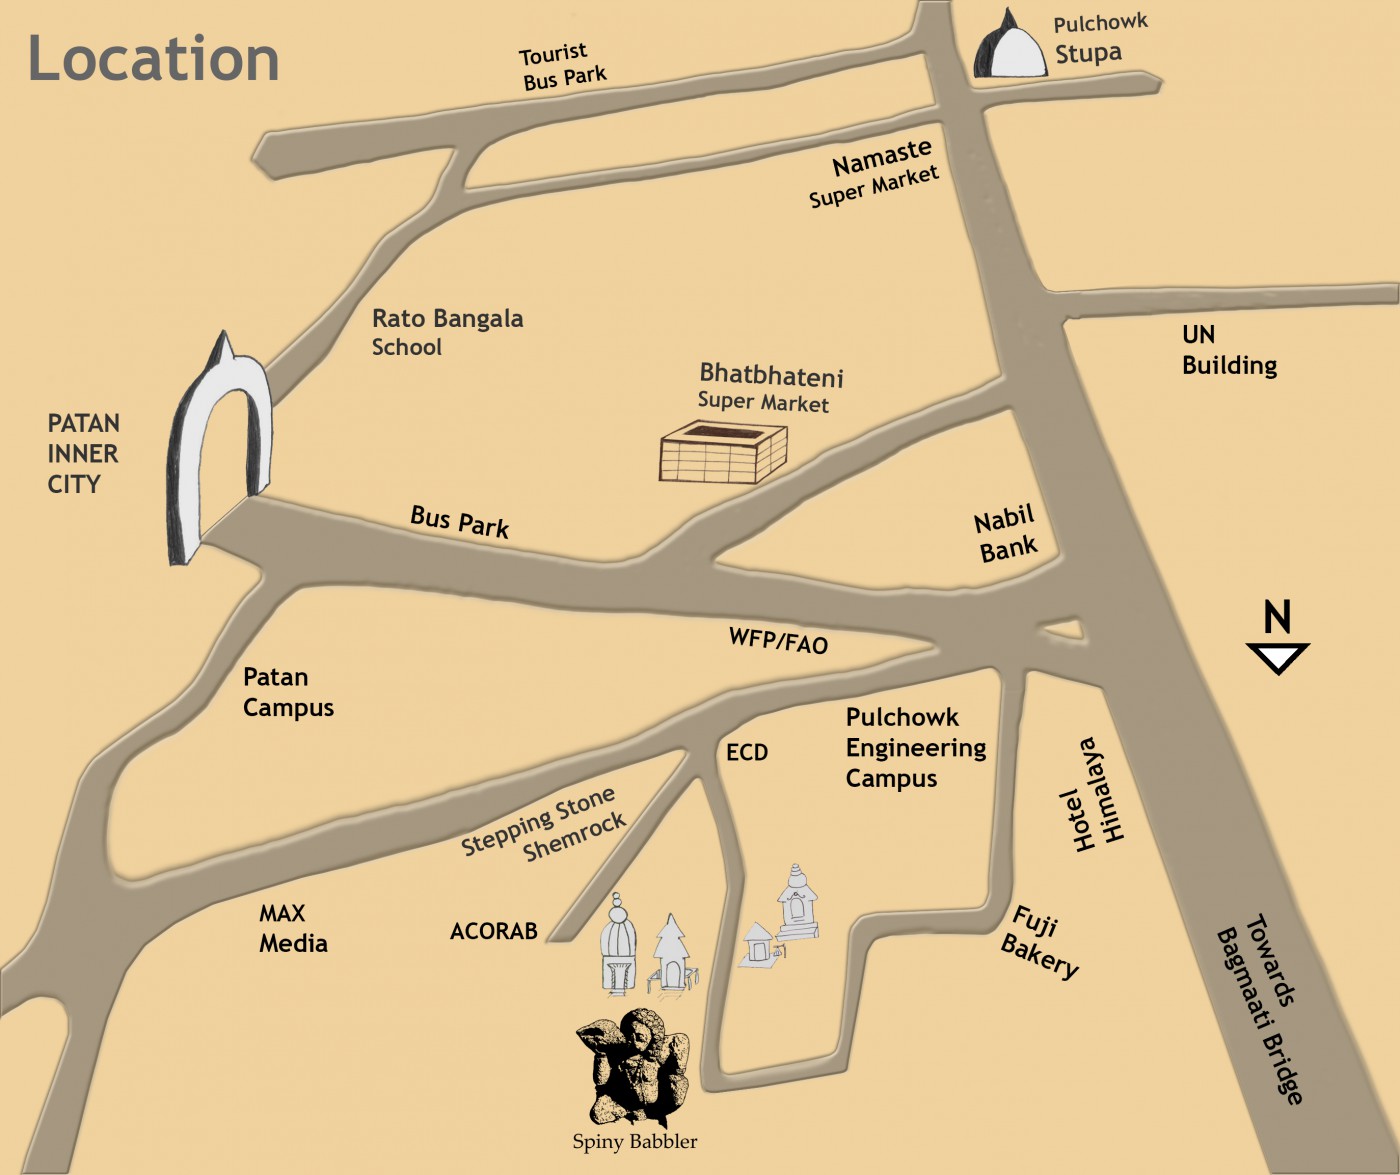 Location Map of Swasthani.org